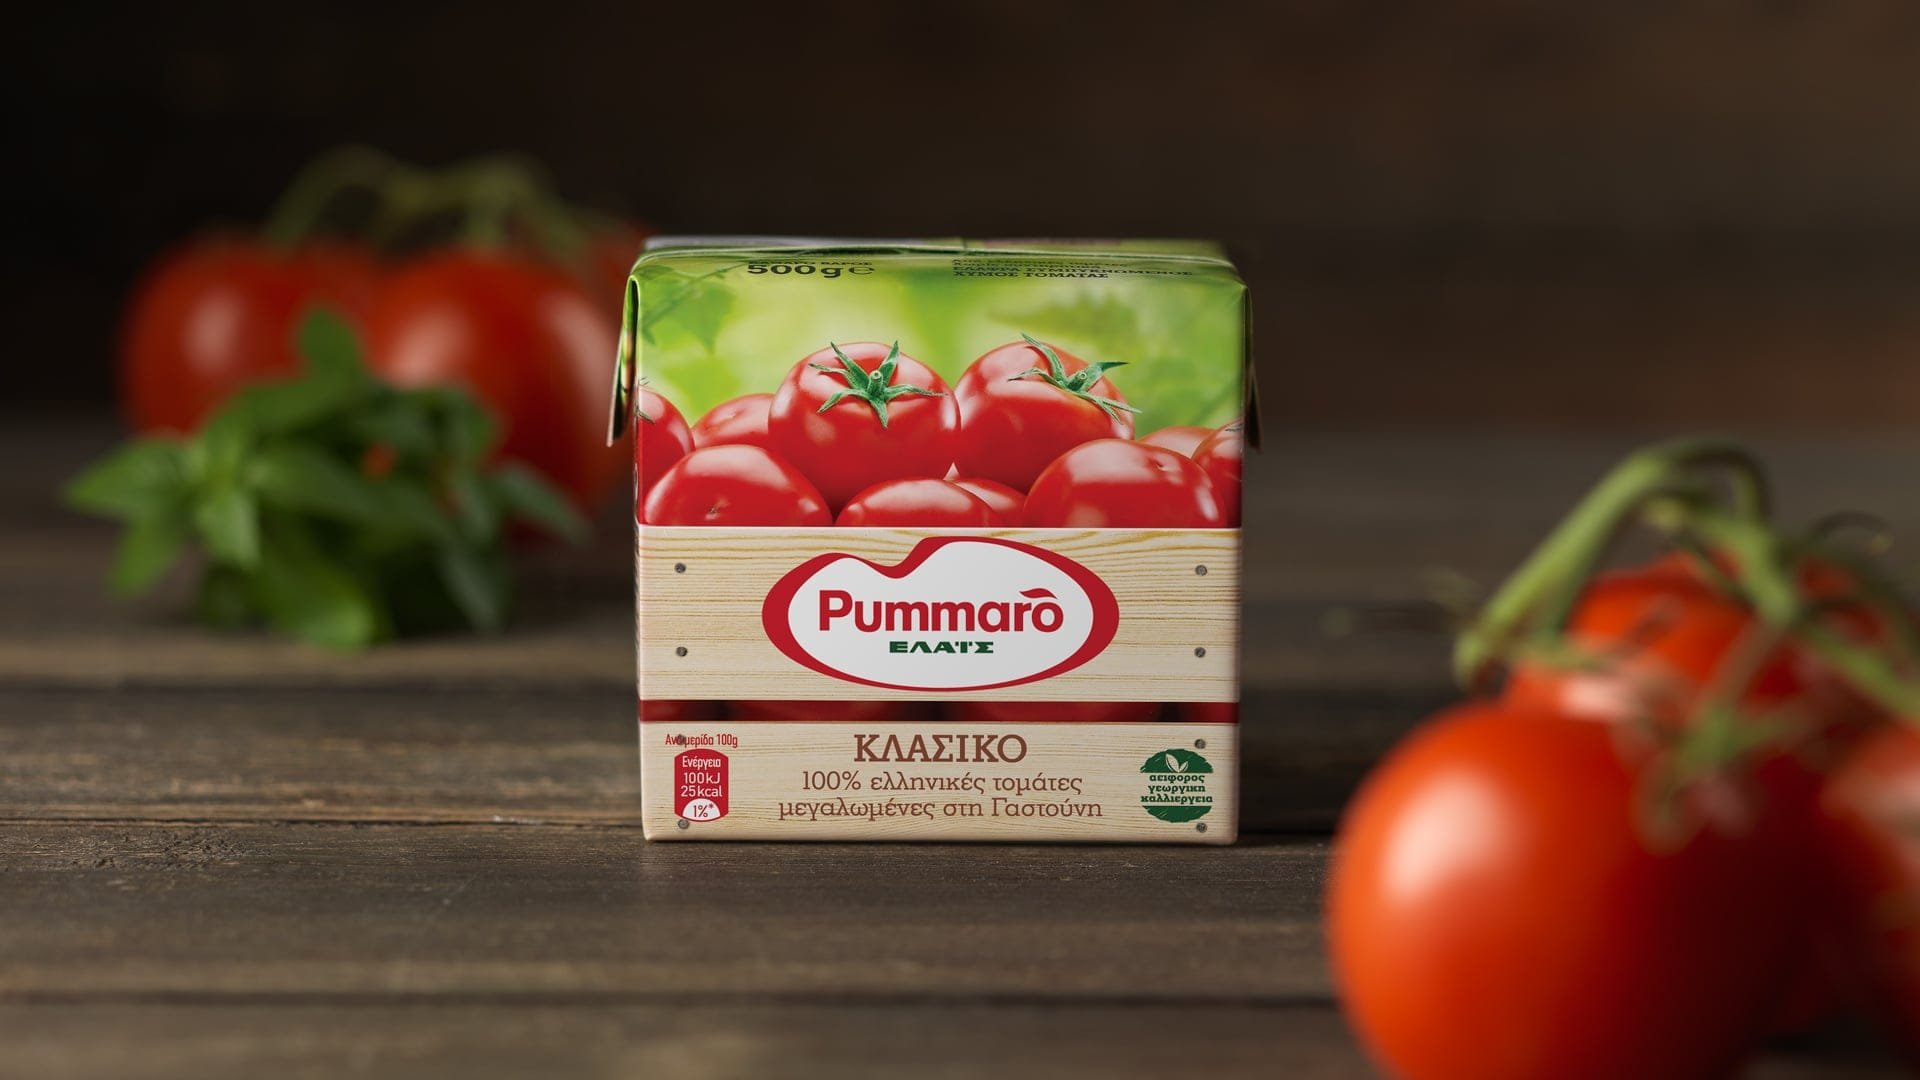 Pummaro tomato puree new packaging in Tetra Pak container, photographed on a wooden surface among fresh tomatoes